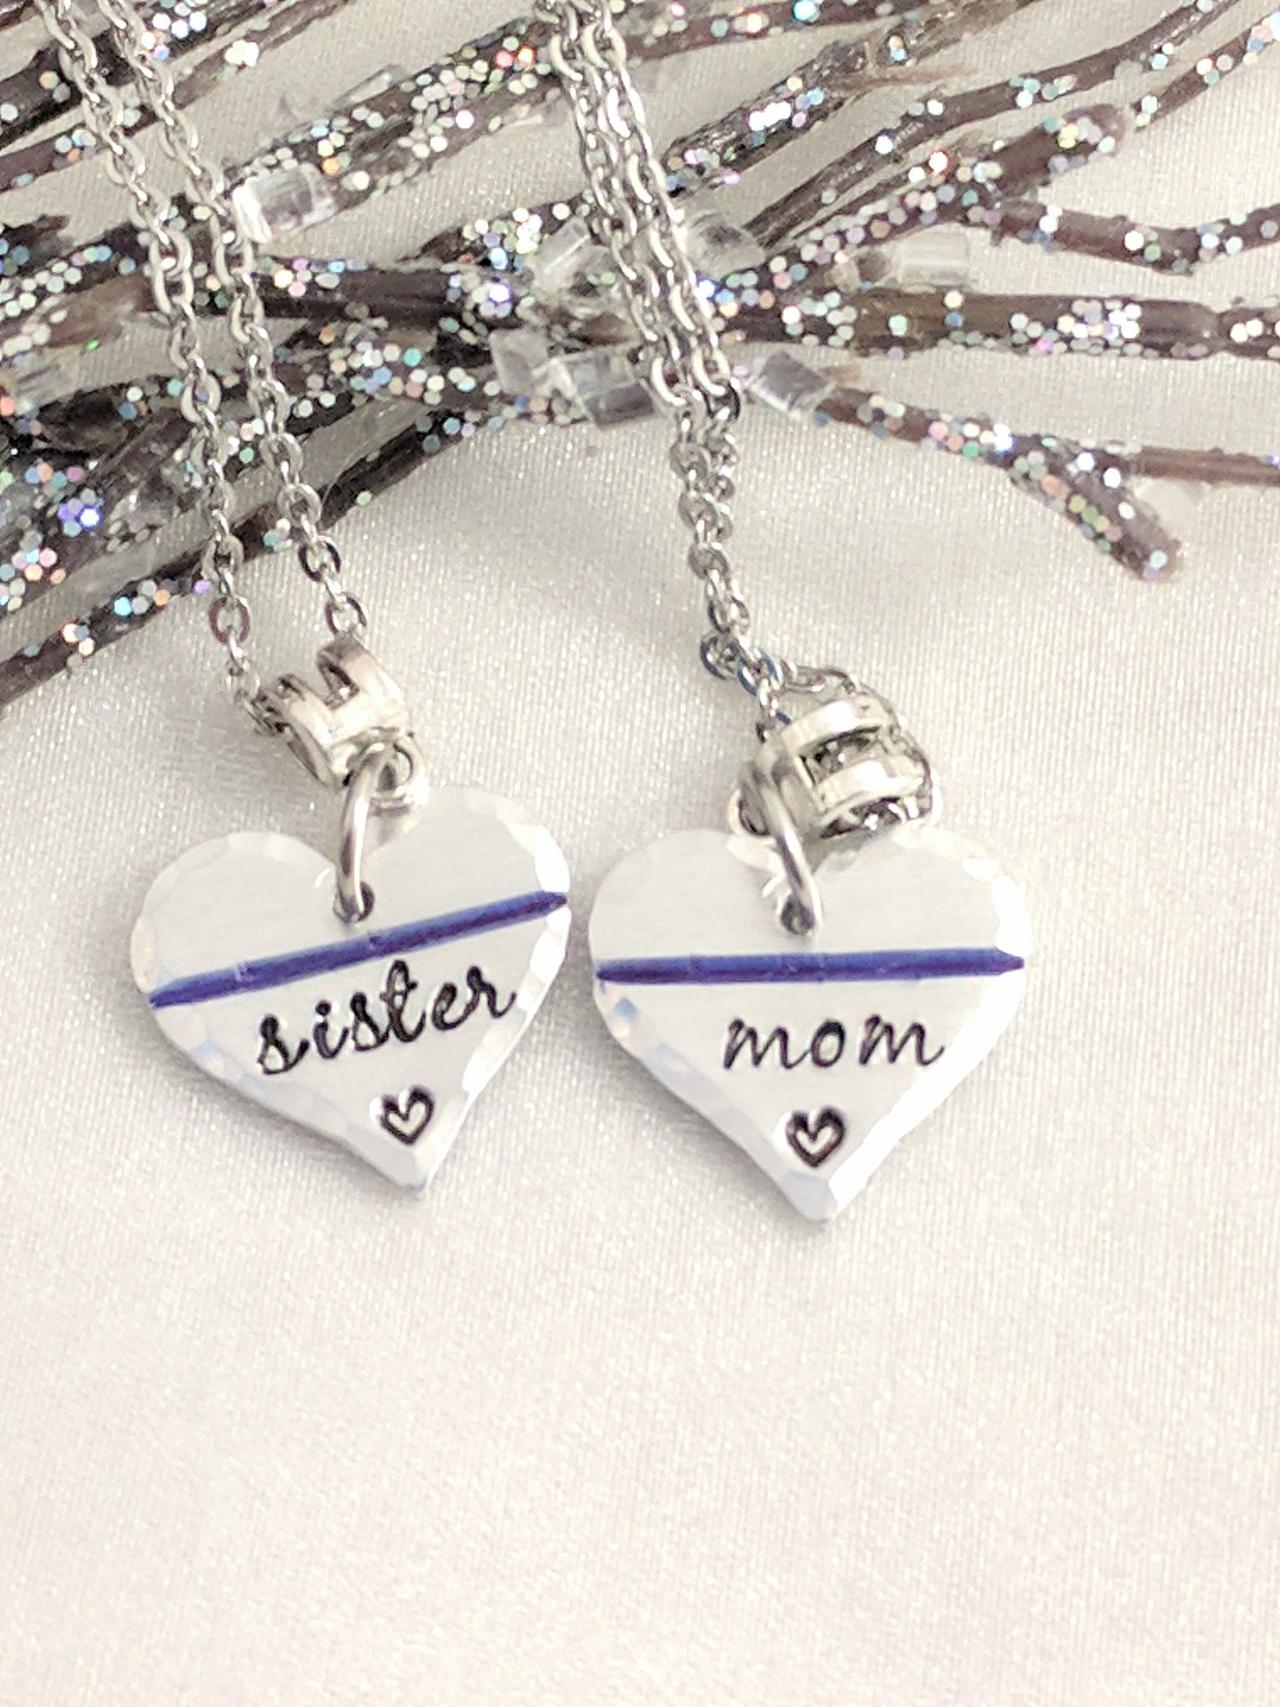 Hand Stamped Necklace Police Mom Jewelry - Police Wife Jewelry - Hand Stamped - Thin Blue Line Support - Police Officer - Cop Wife - Cop Gifts -